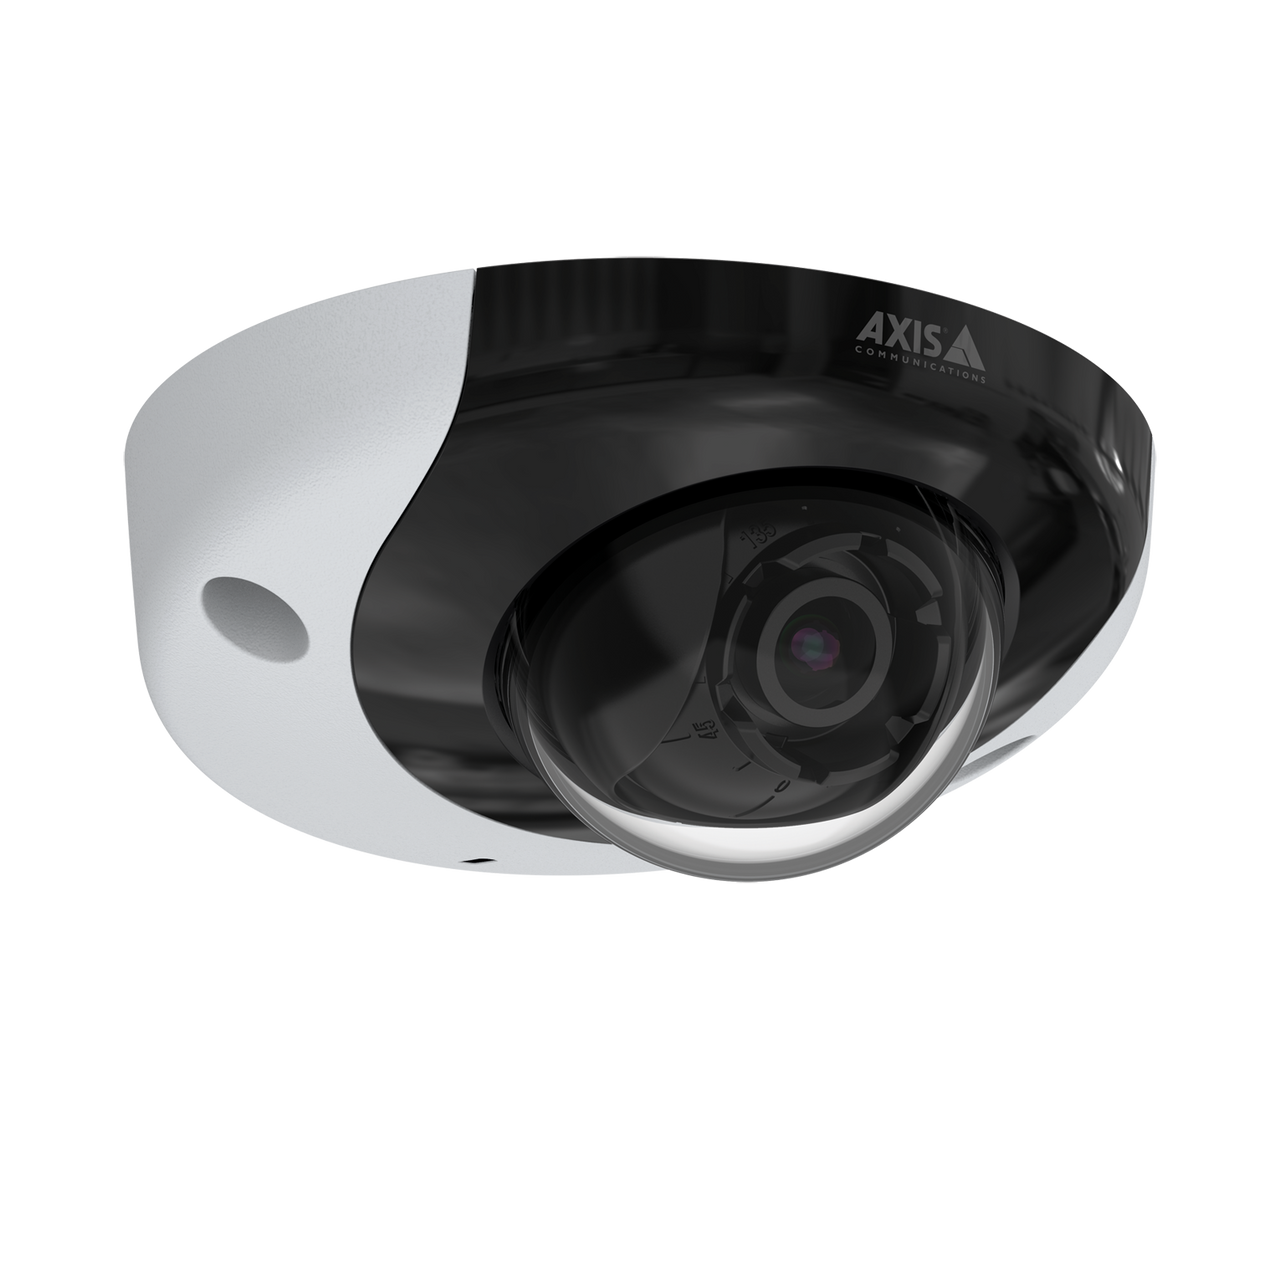 AXIS P3935-LR M12 Best-in-class dome with IR for advanced onboard surveillance